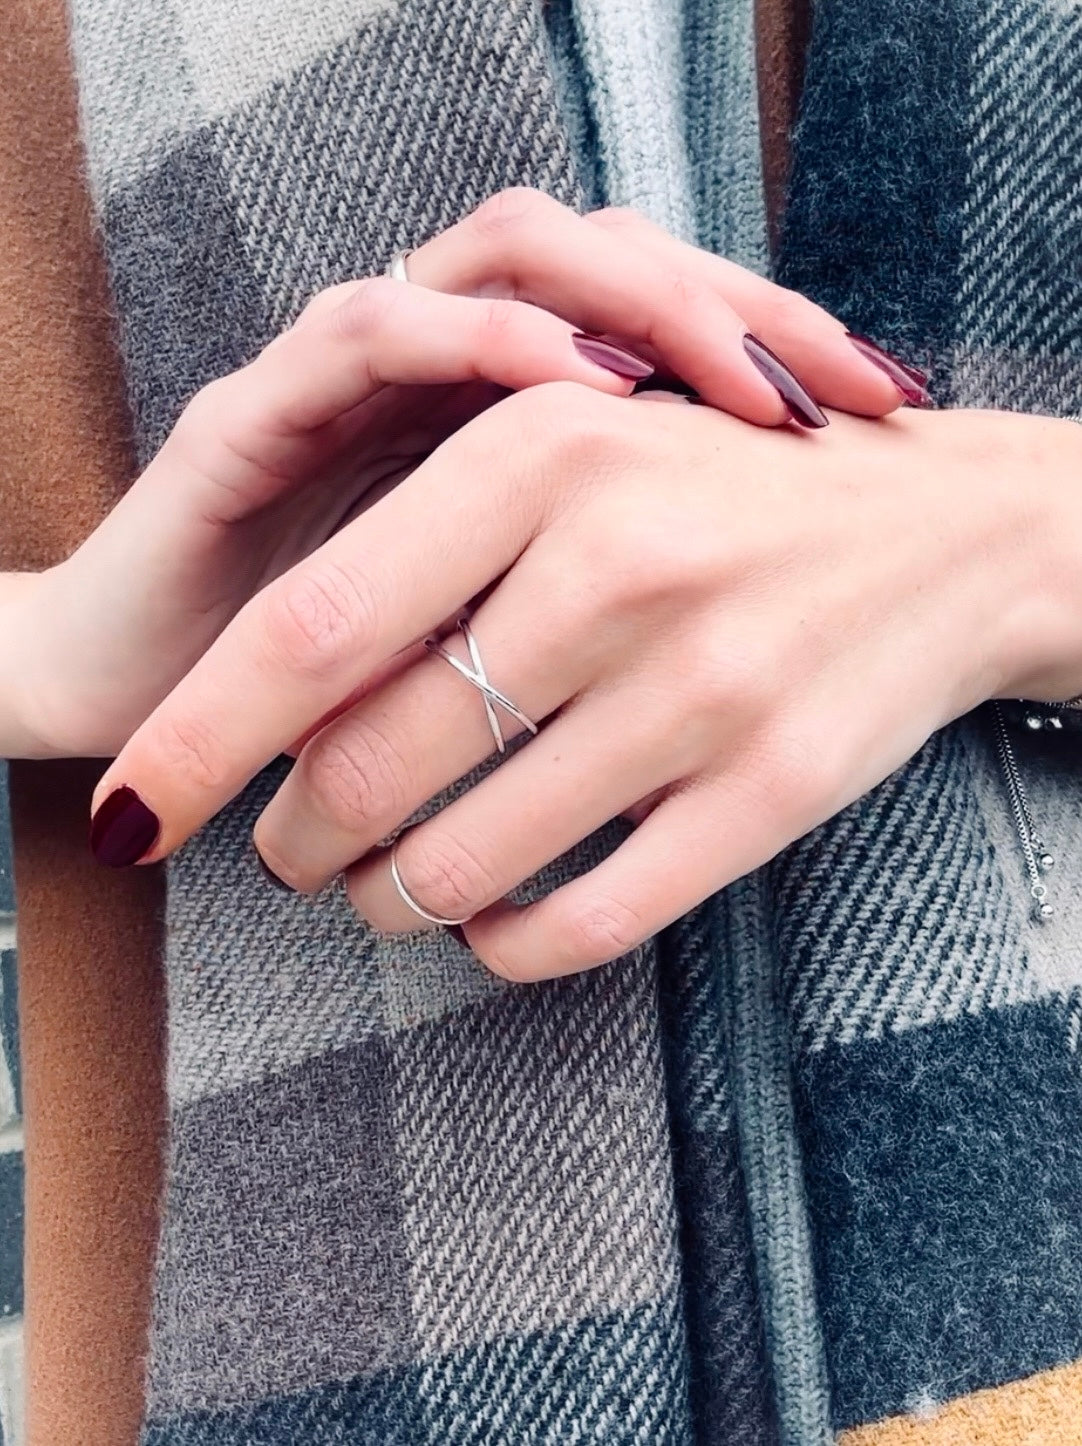 The Silver Criss Cross Ring